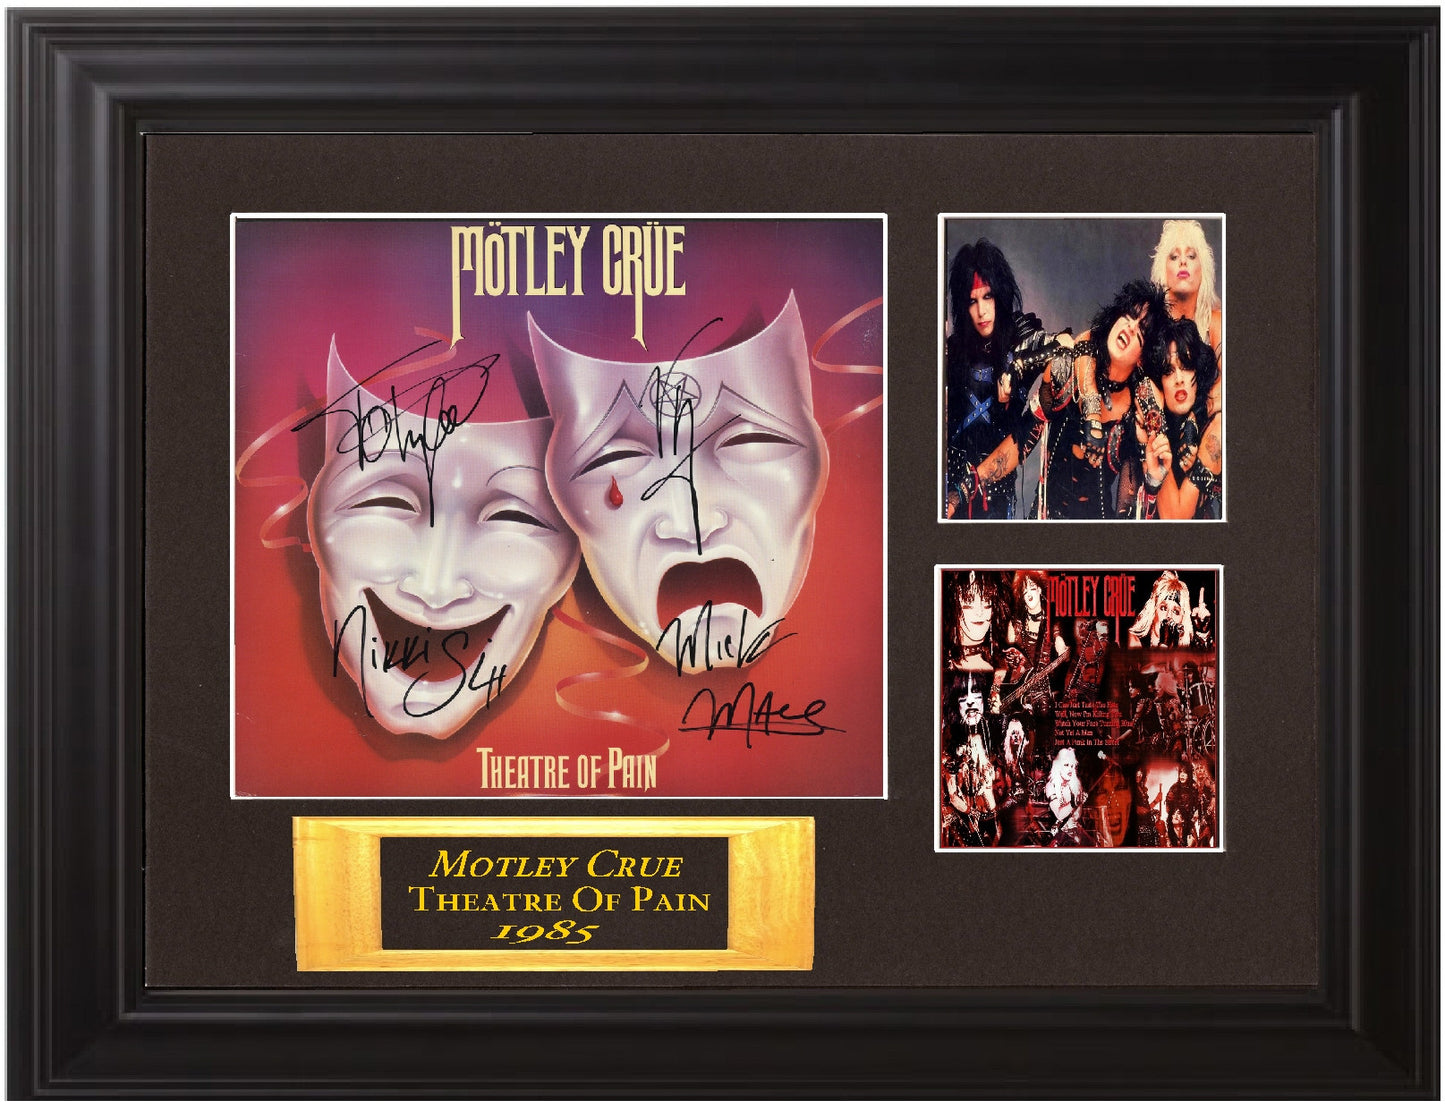 Motley Crue Autographed Lp "Theater of Pain" - Zion Graphic Collectibles